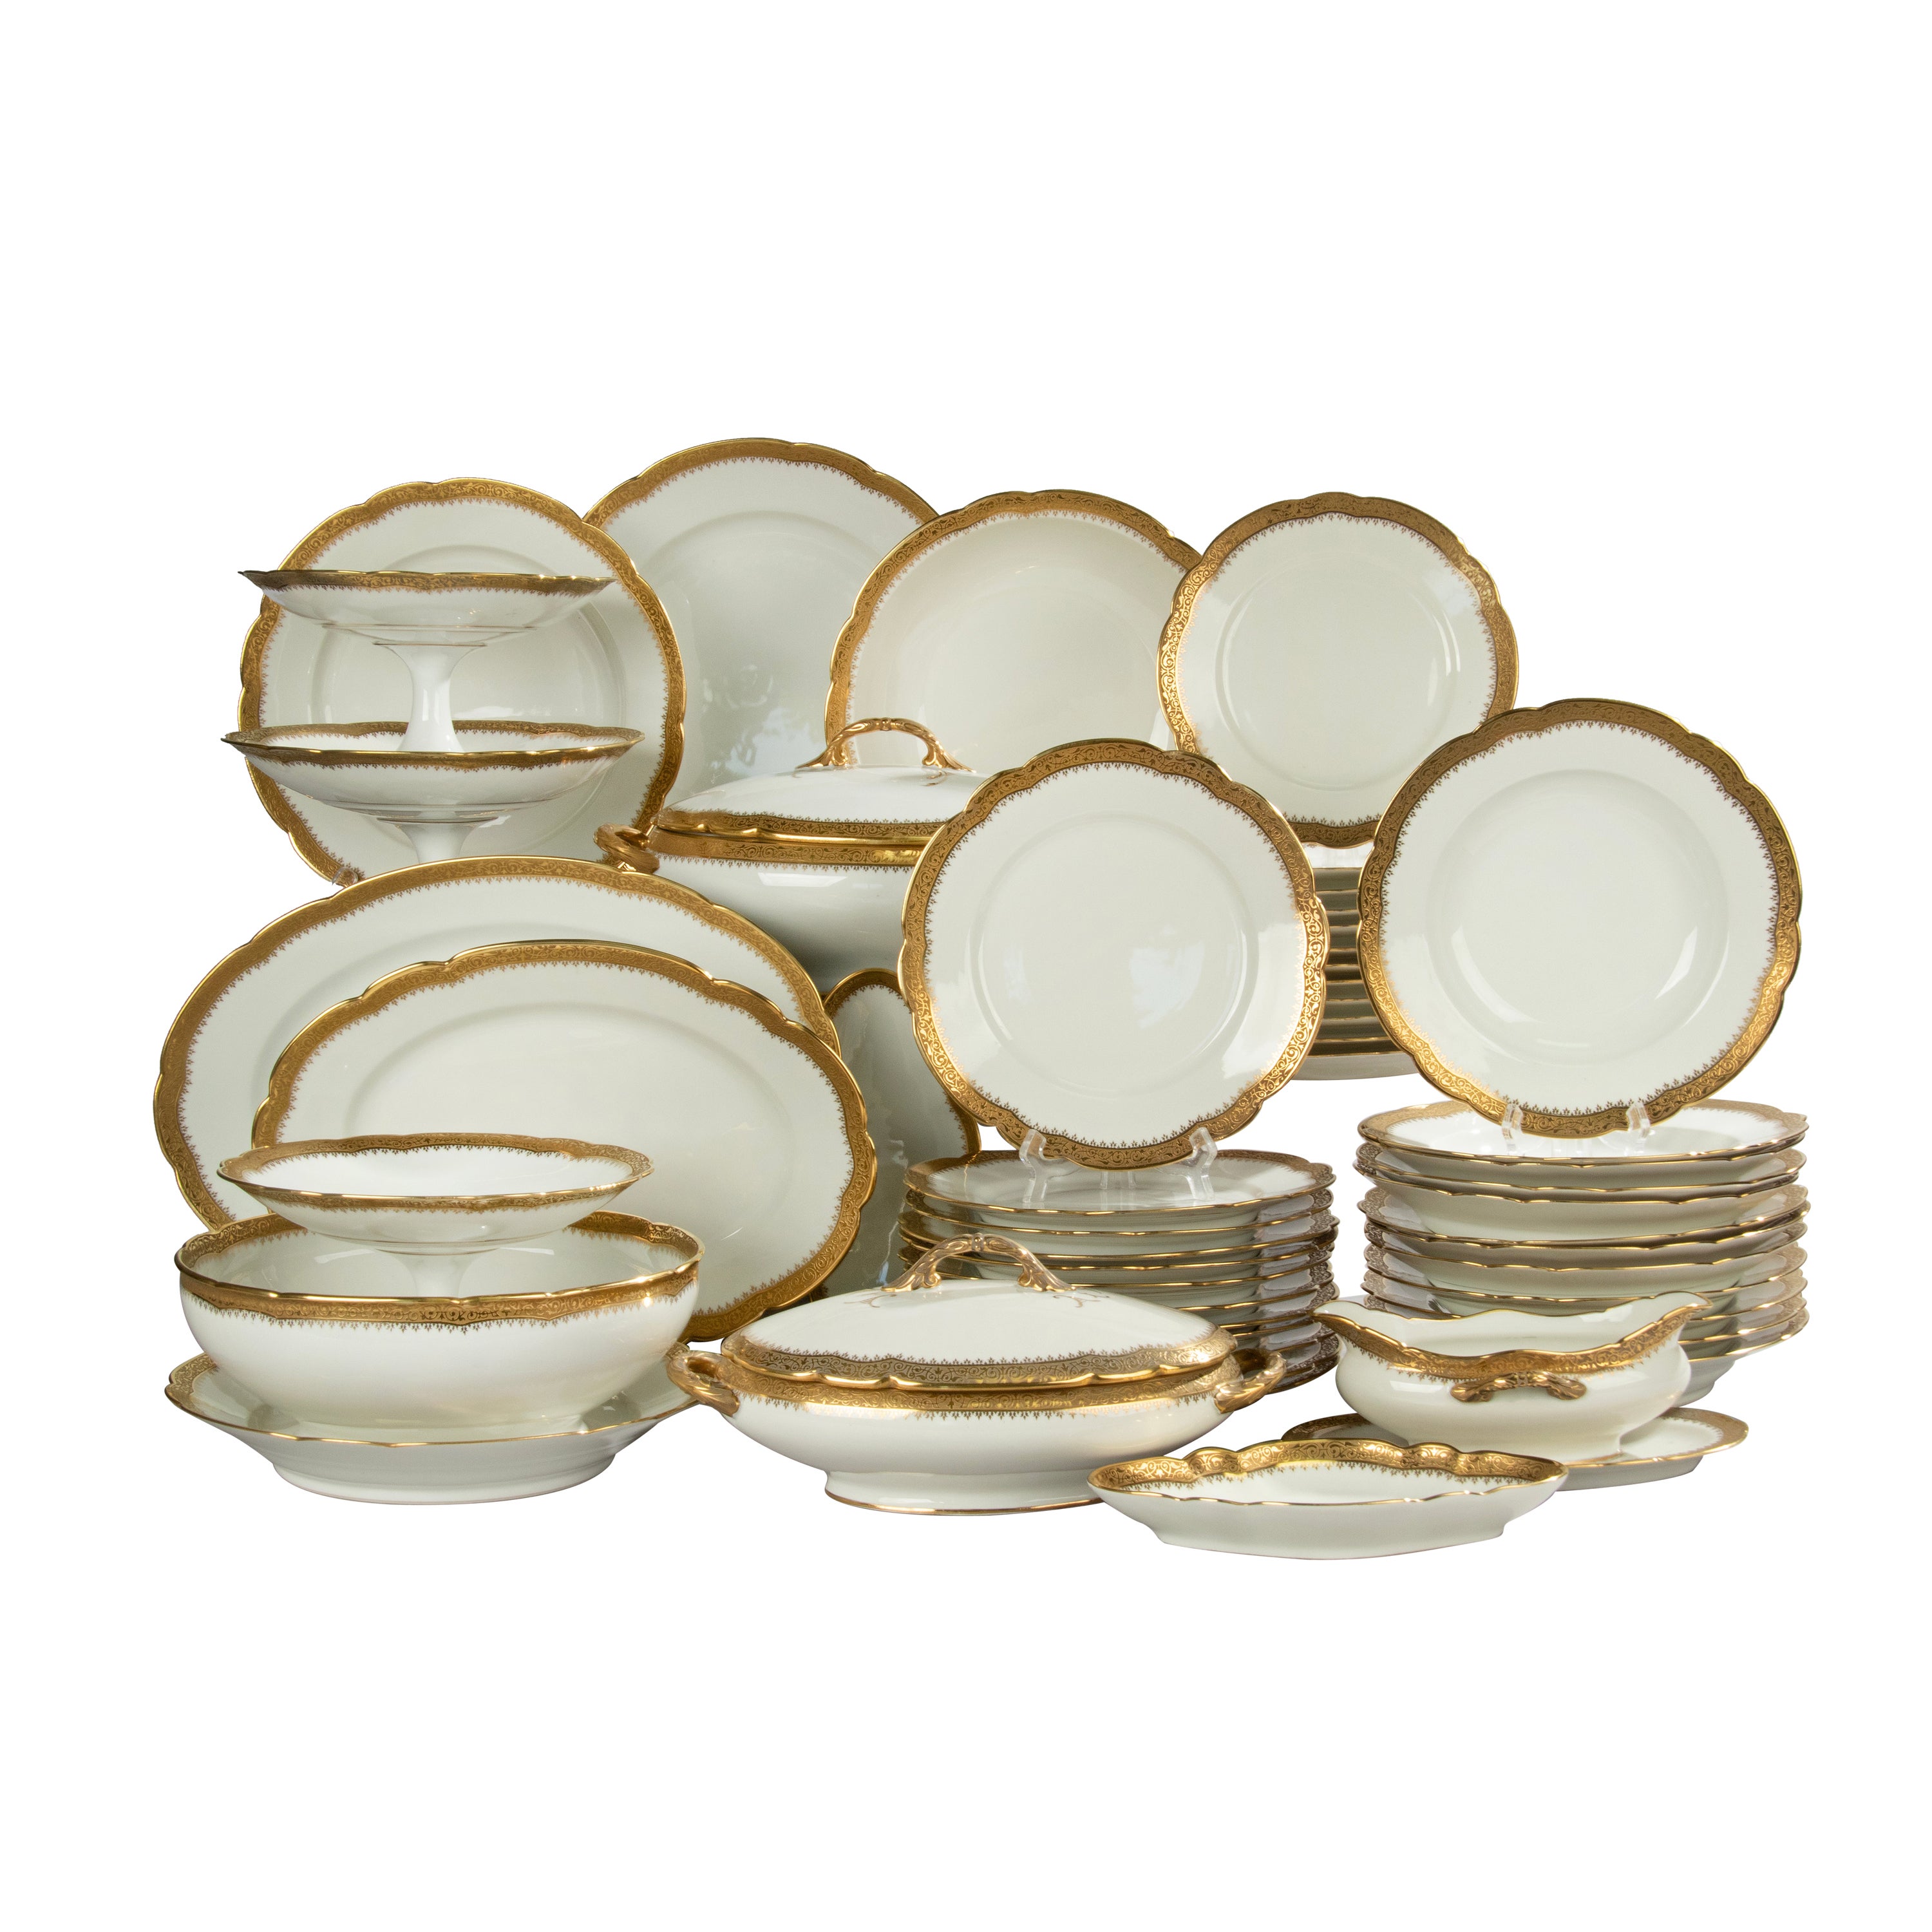 51-Piece Set Porcelain Tableware for 12 Persons - Limoges Incrusted Gold Trims